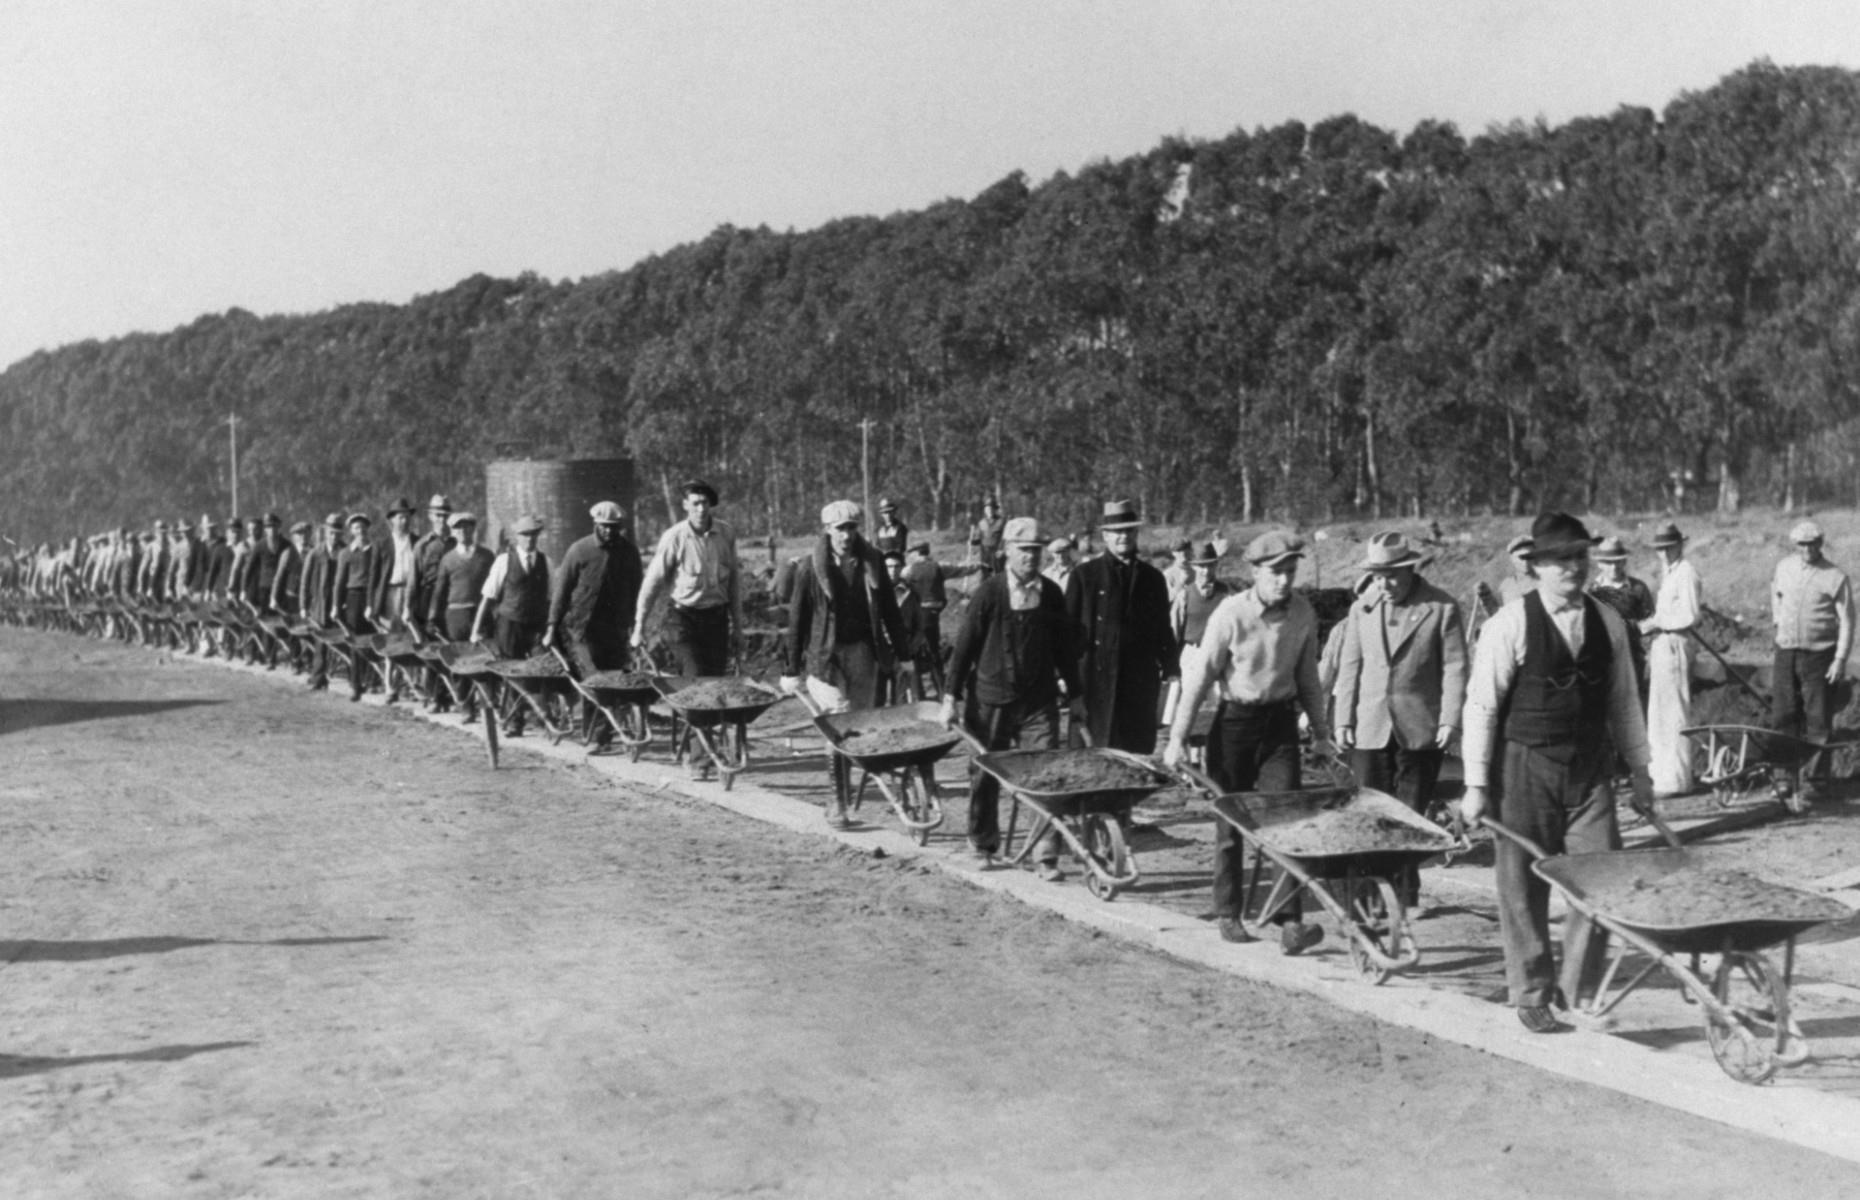 <p>As the Depression continued, President Roosevelt pushed for more money to be spent on job creation projects, but his critics complained that the money was being wasted. These workers from the Civil Works Administration are building the Lake Merced Parkway Boulevard in San Francisco, but an inflated workforce made the road-building process inefficient and expensive.</p>  <p>Site managers struggled to find enough meaningful jobs and some laborers were set useless tasks like digging and refilling ditches and breaking rocks with sledgehammers.</p>